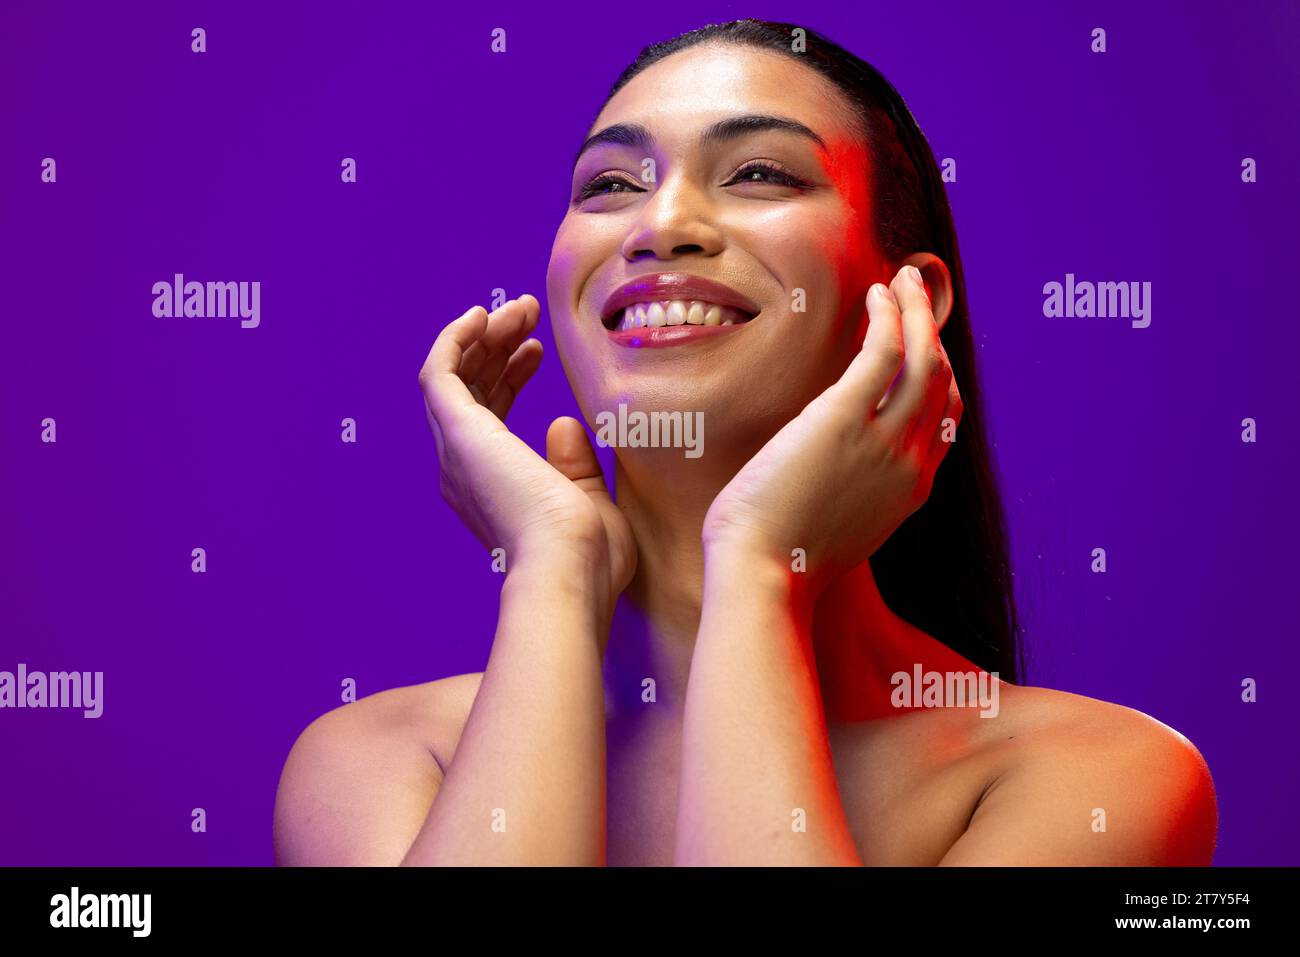 Portrait of smiling biracial woman with dark hair, red lips and eye make up on neon background Stock Photo